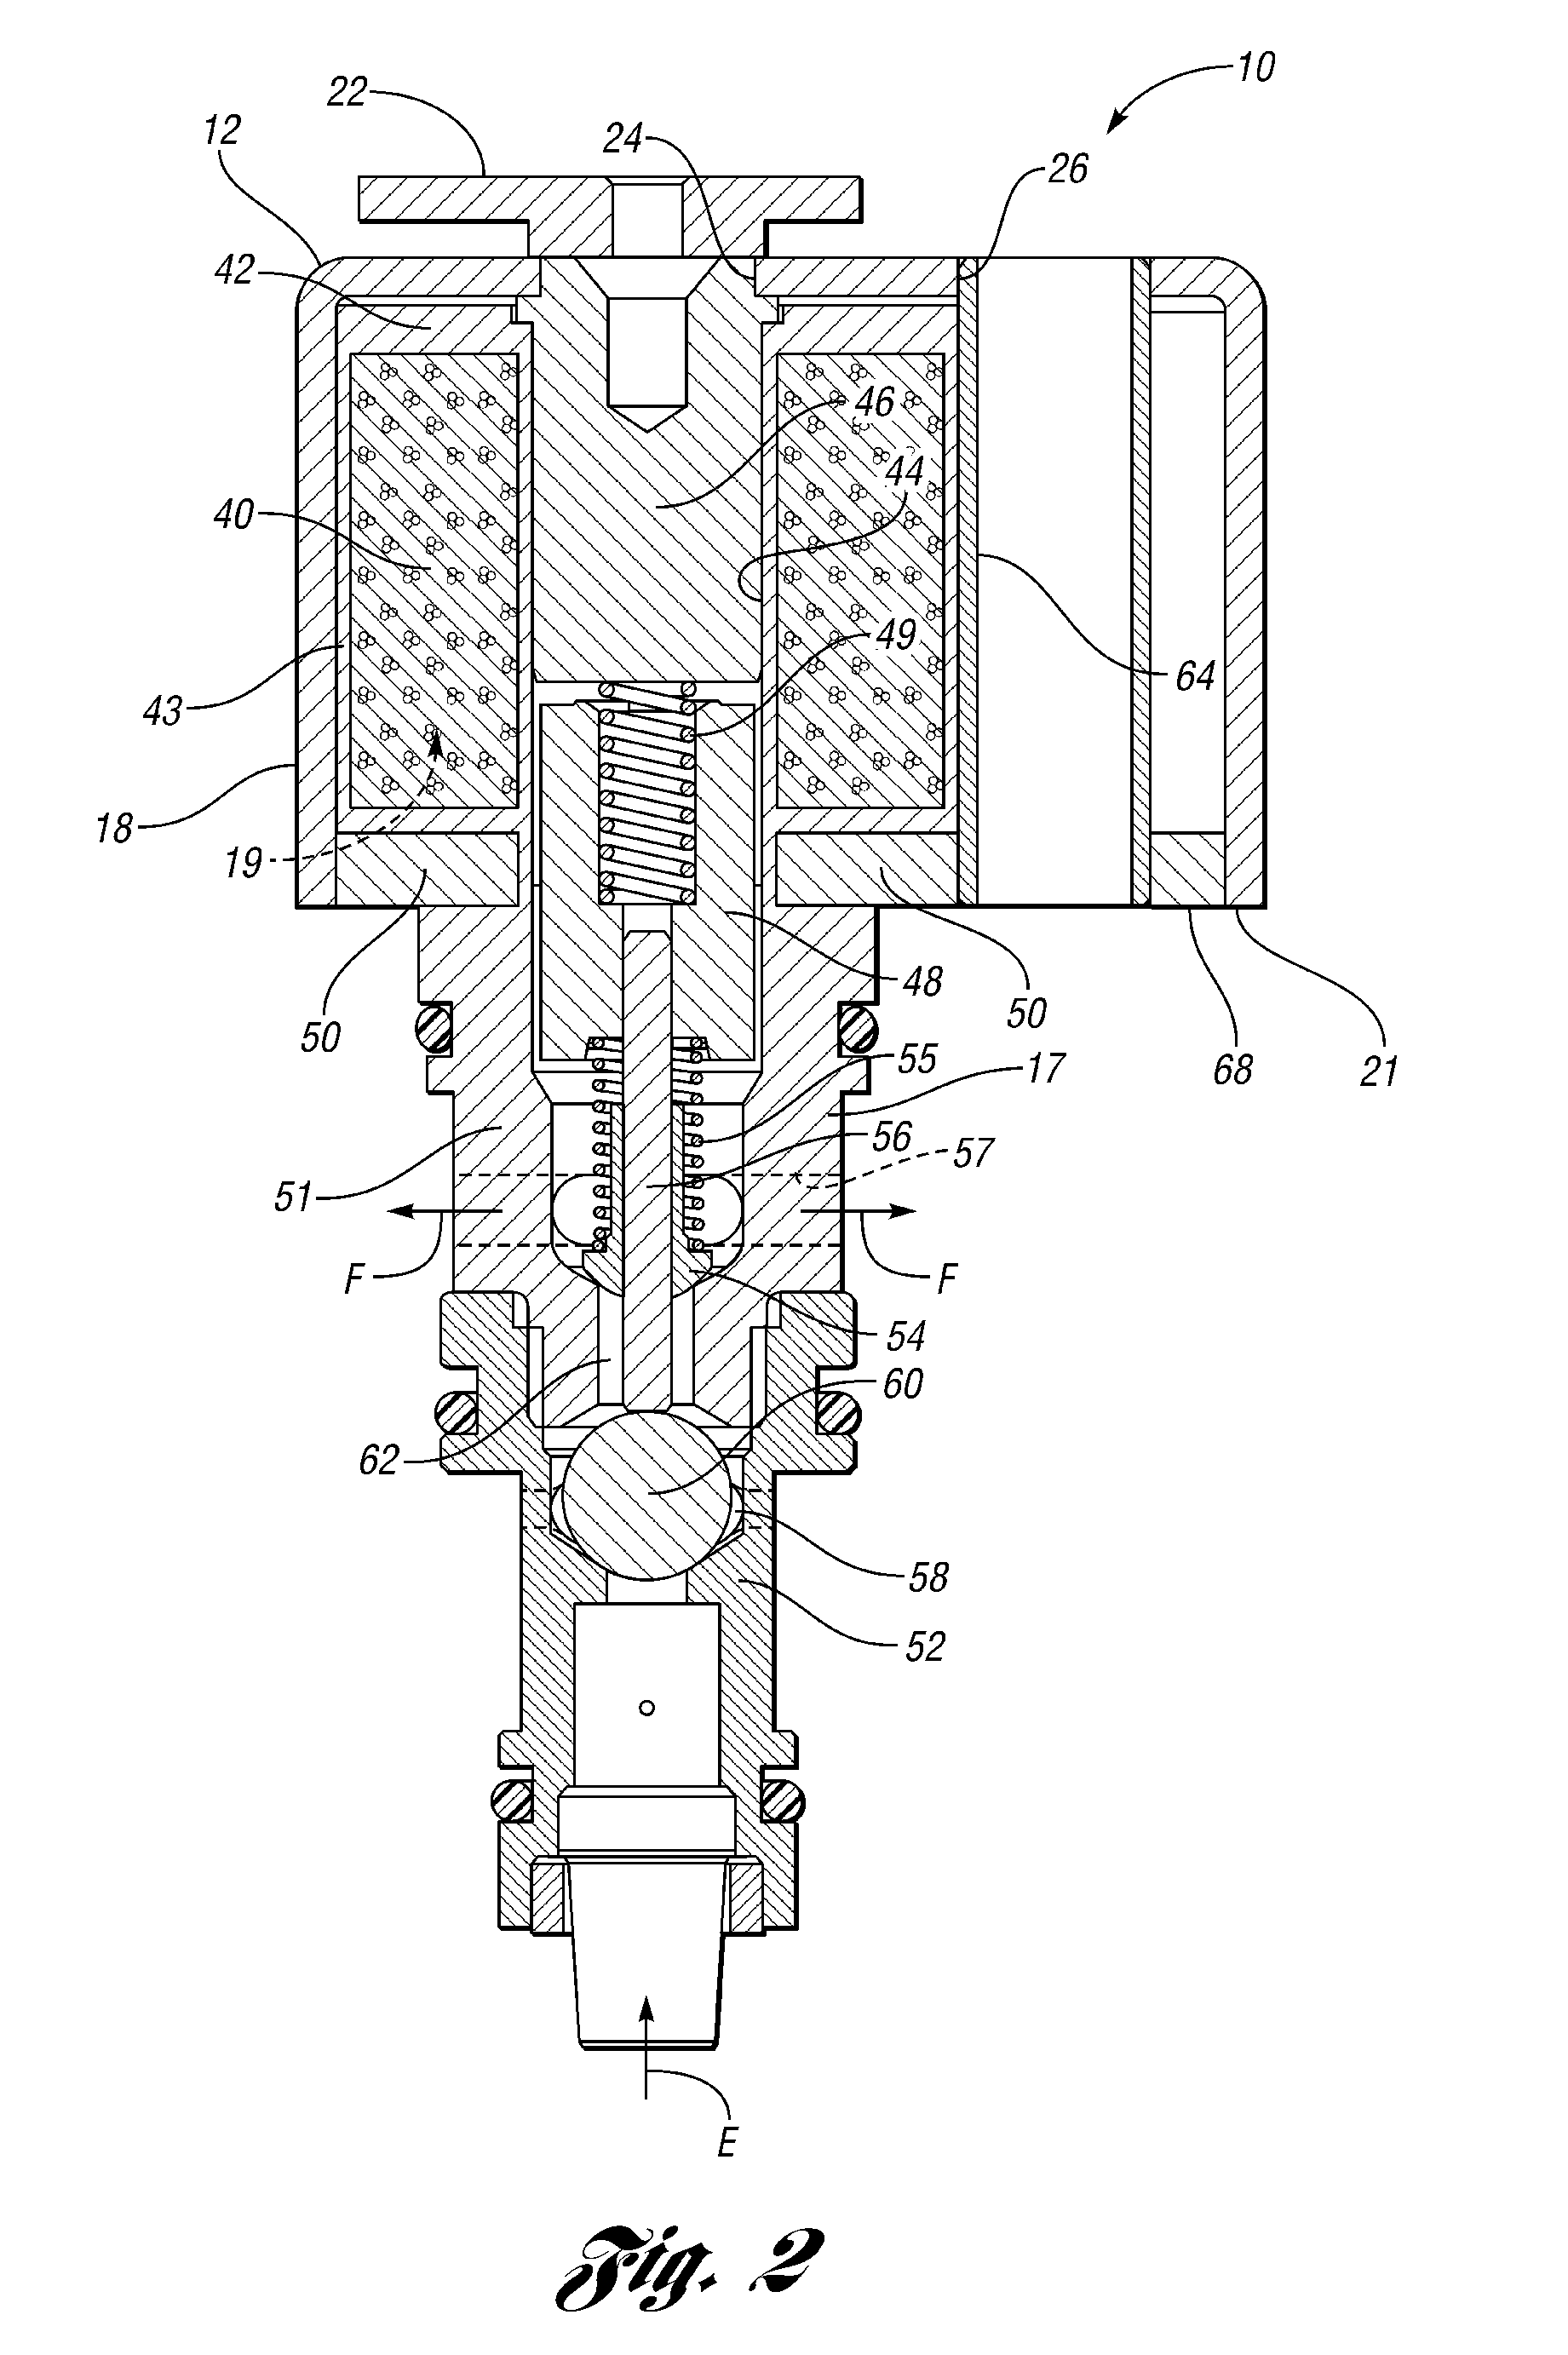 Engine valve assembly with valve can mountable to an engine cover